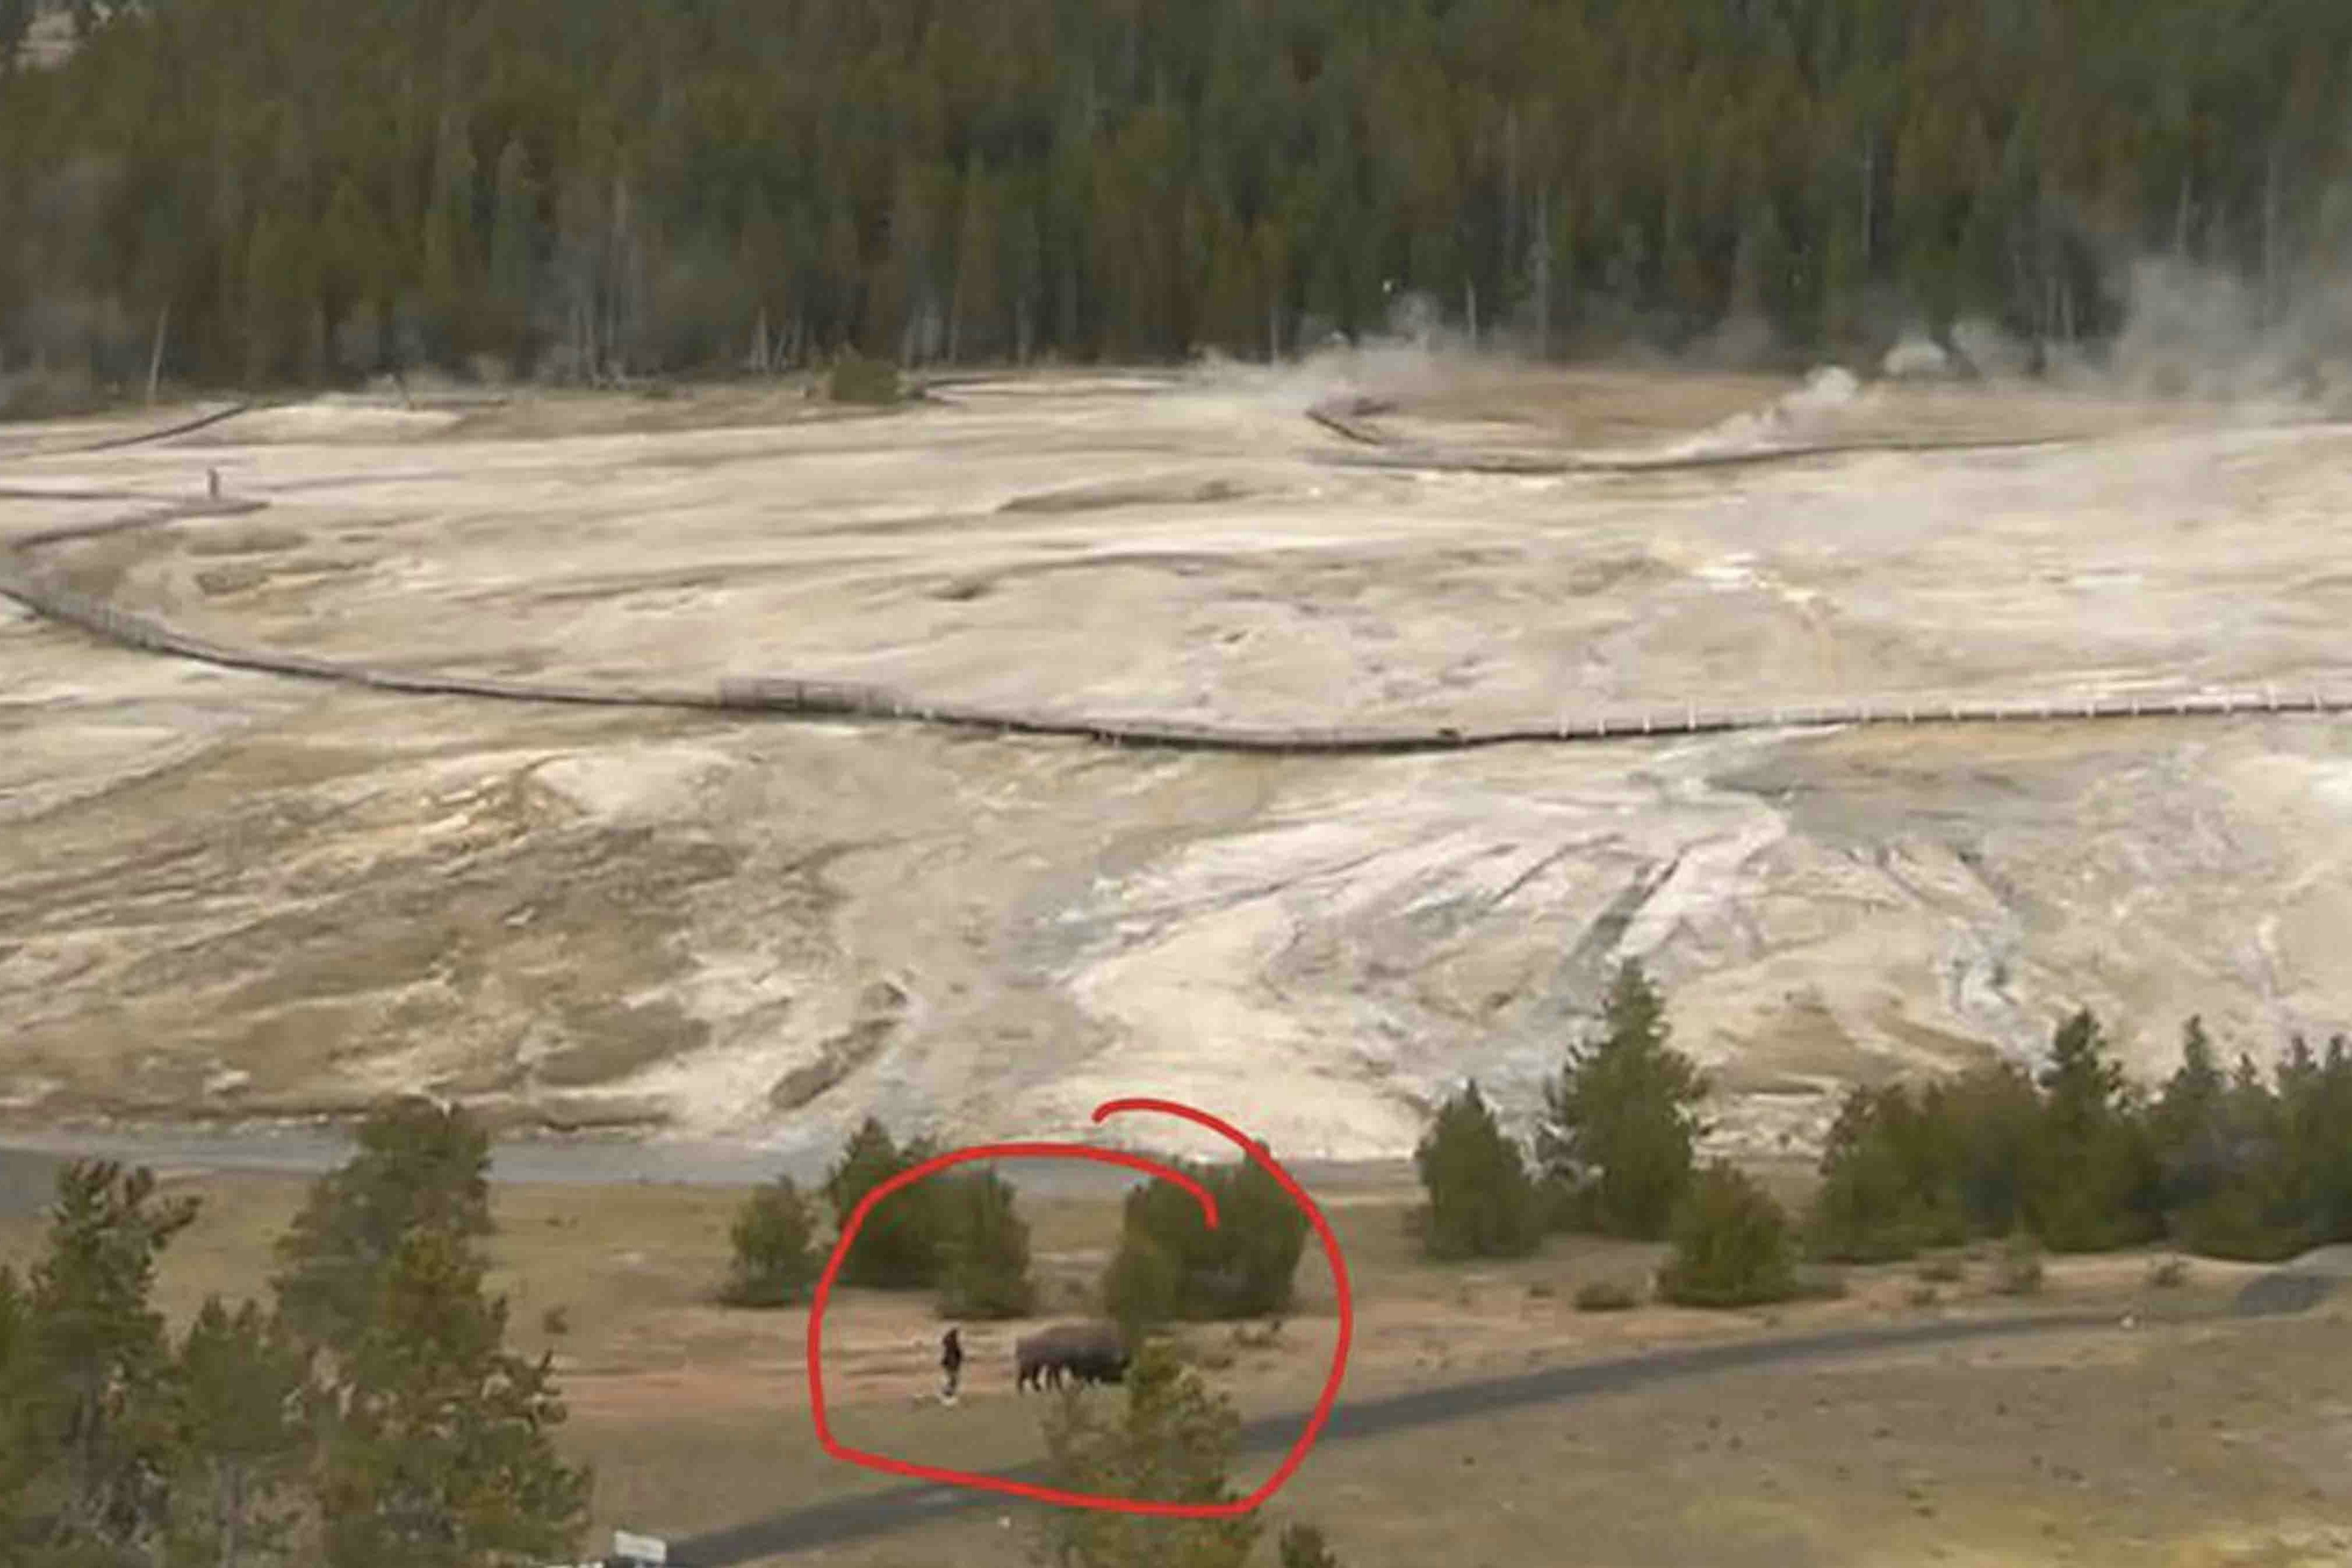 Still image from National Park Service web cam shows a tourist get within arm's reach of a large bison in Yellowstone.